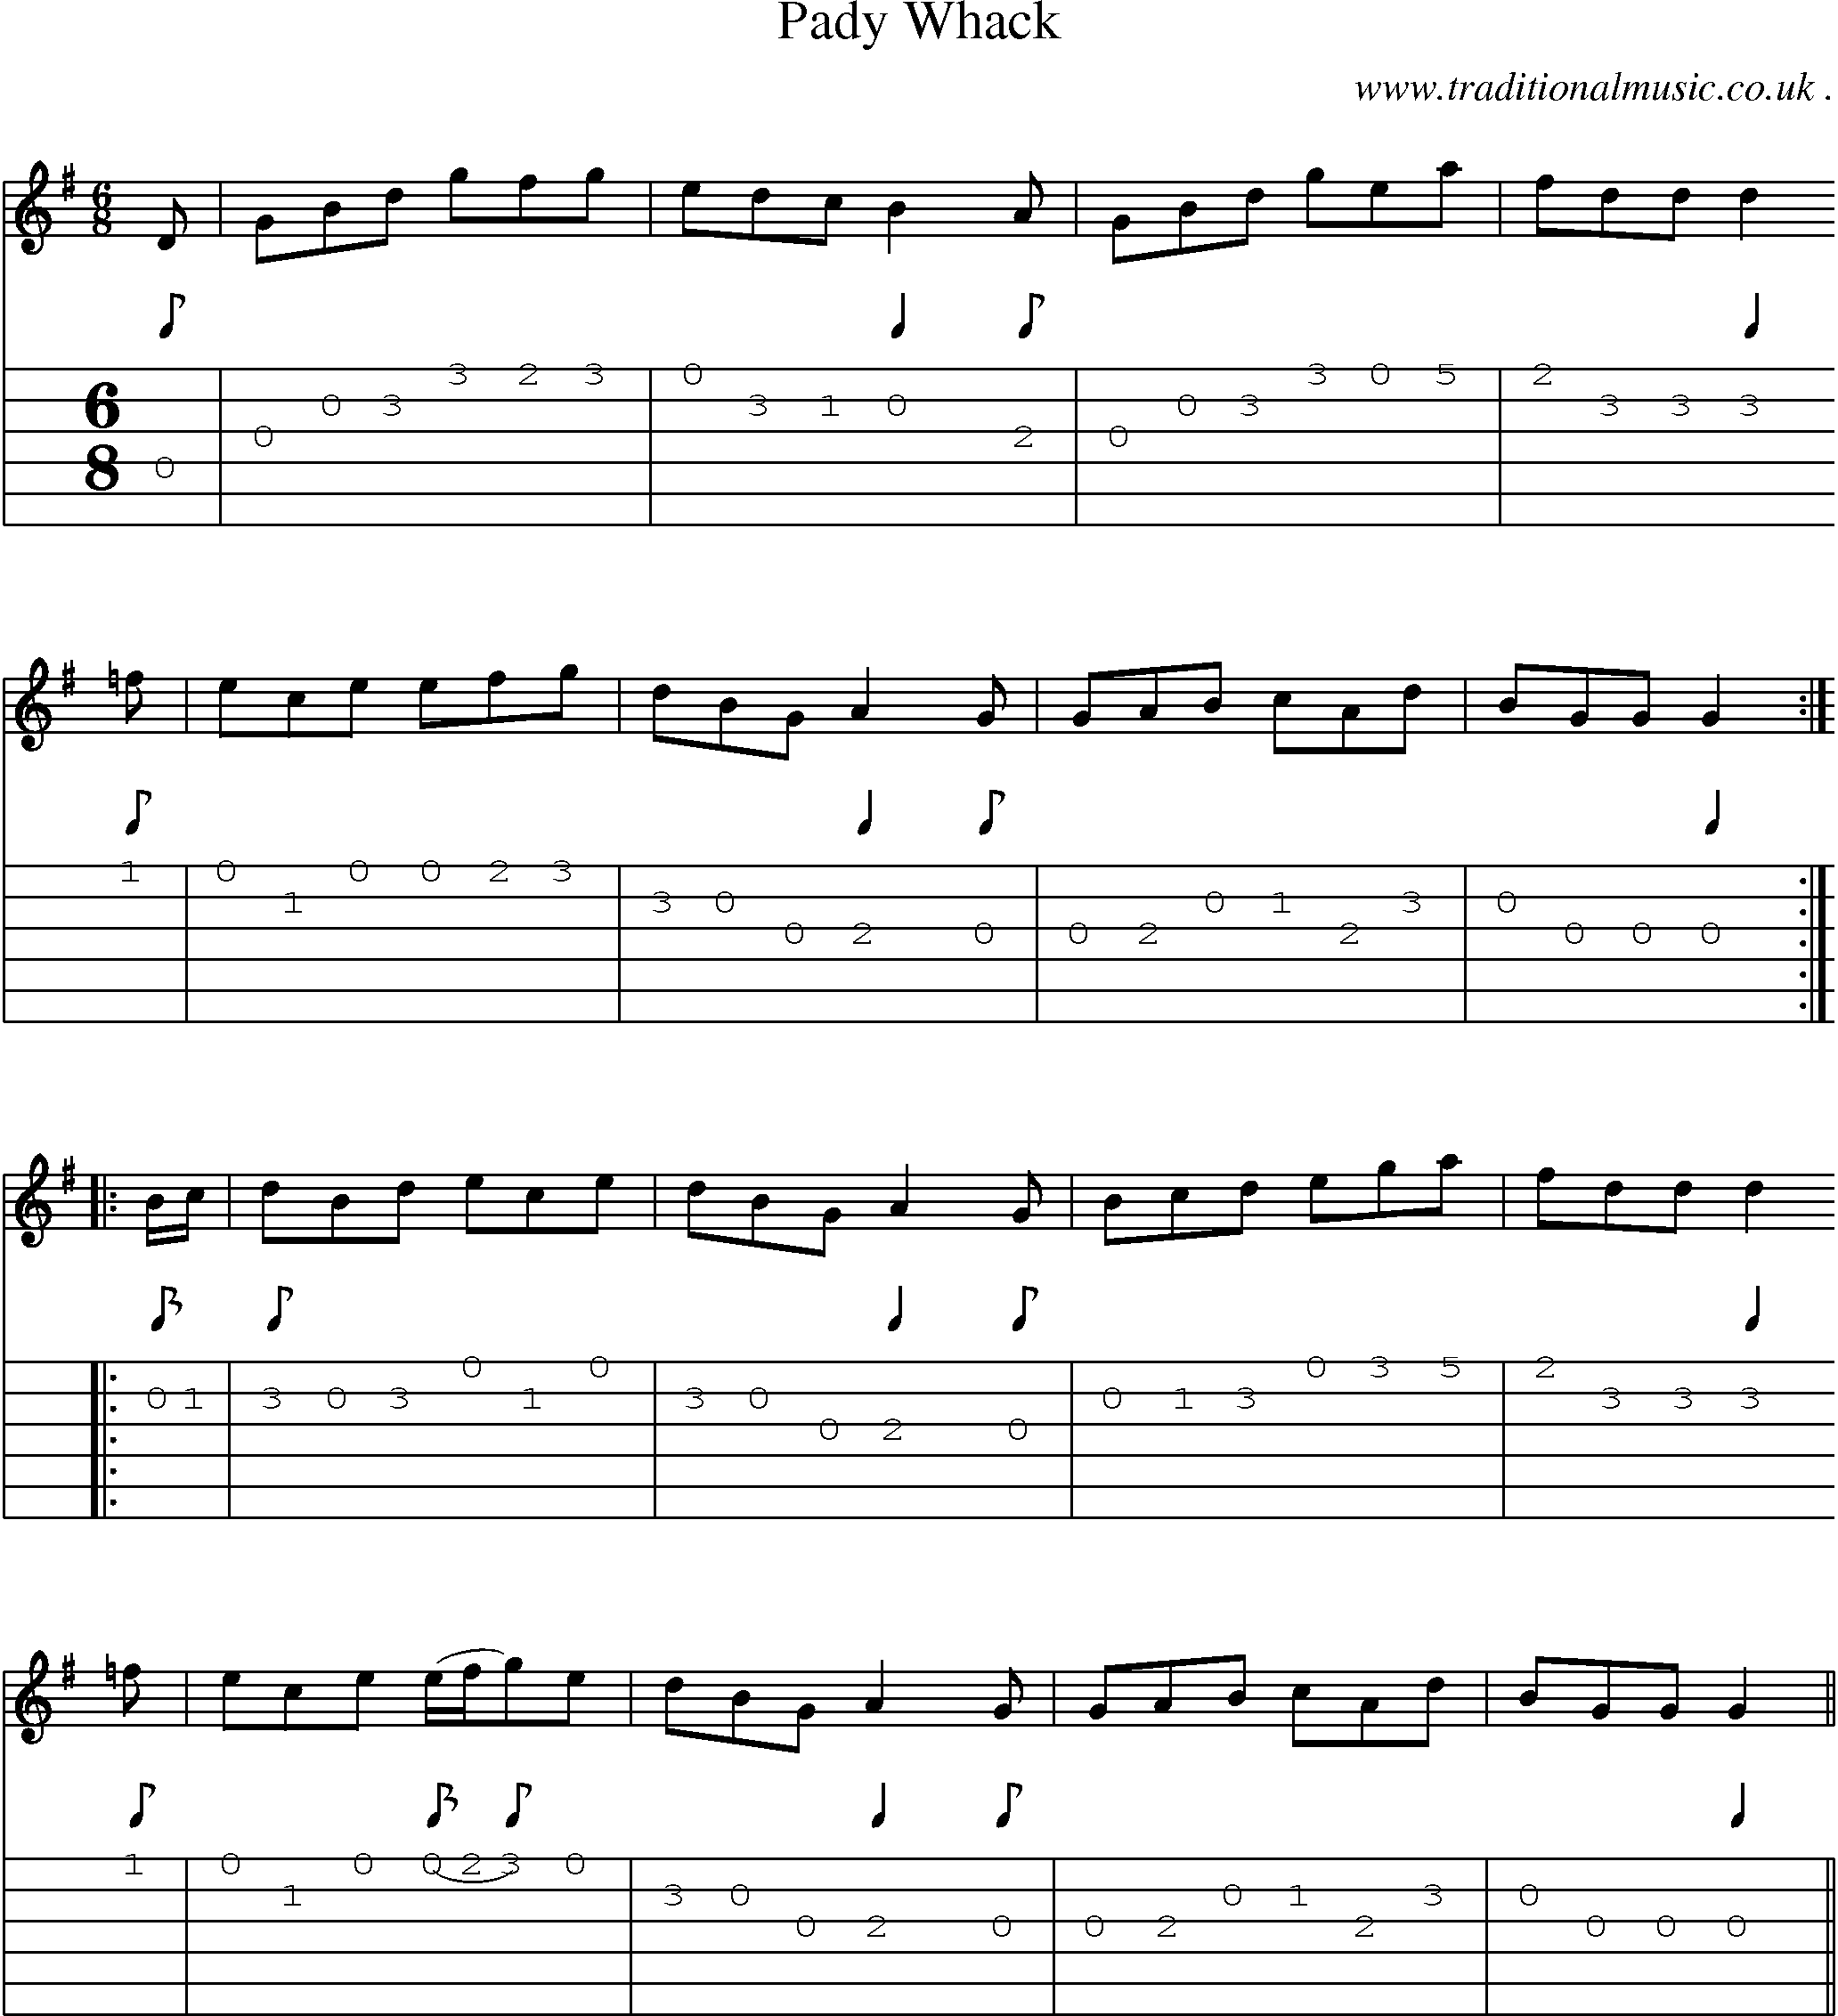 Sheet-Music and Guitar Tabs for Pady Whack